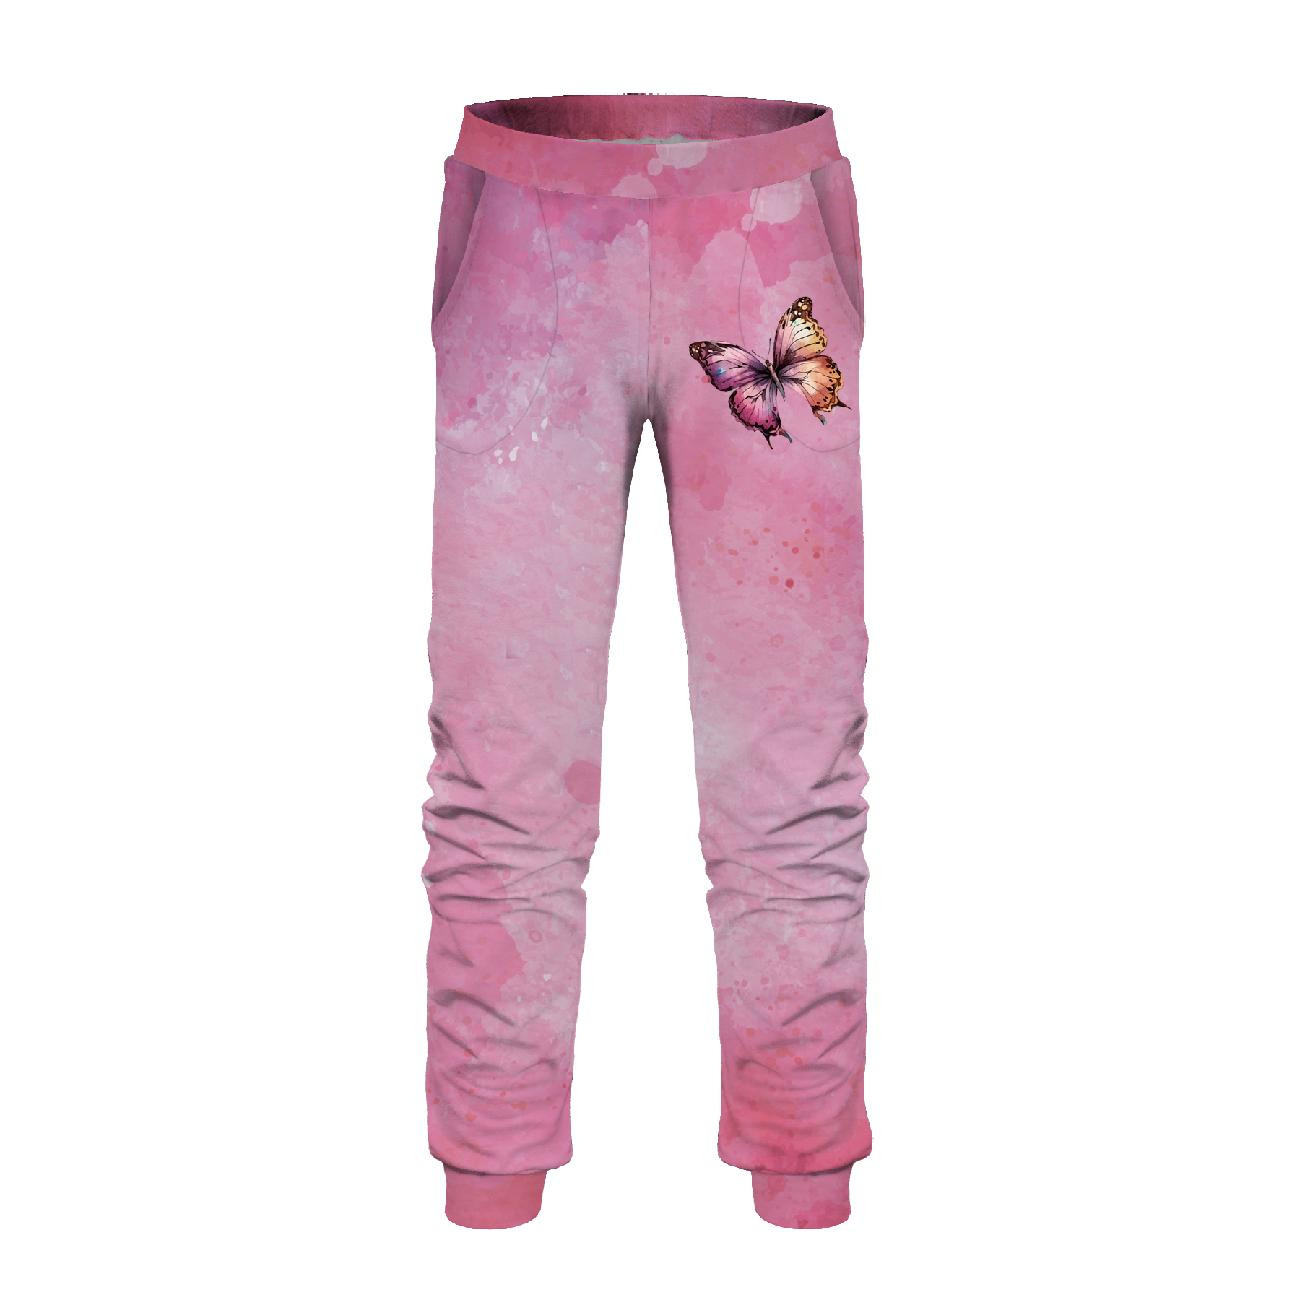 Children's tracksuit (MILAN) - BUTTERFLY PAT. 2 - sewing set